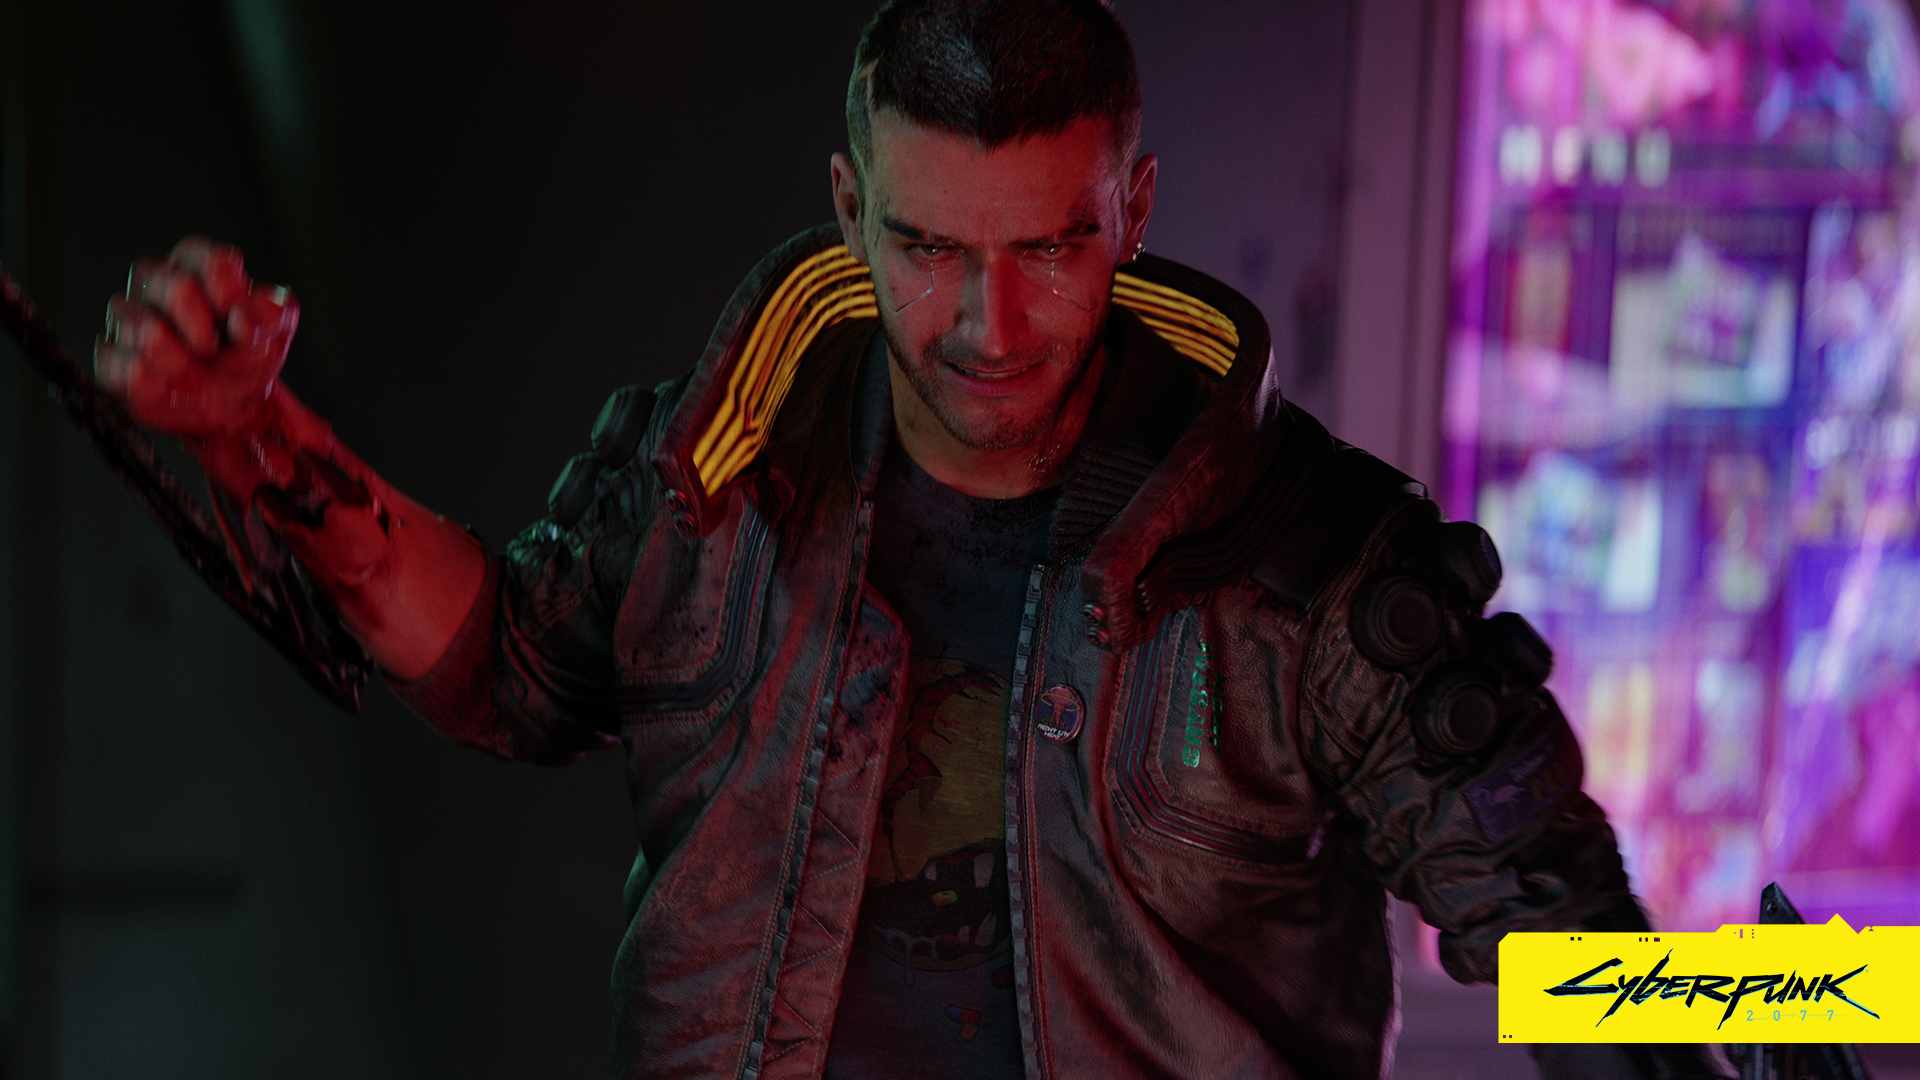 Cyberpunk 2077 Release Date, Gameplay, Story New Wallpaper reveals V's Mission and Other Details